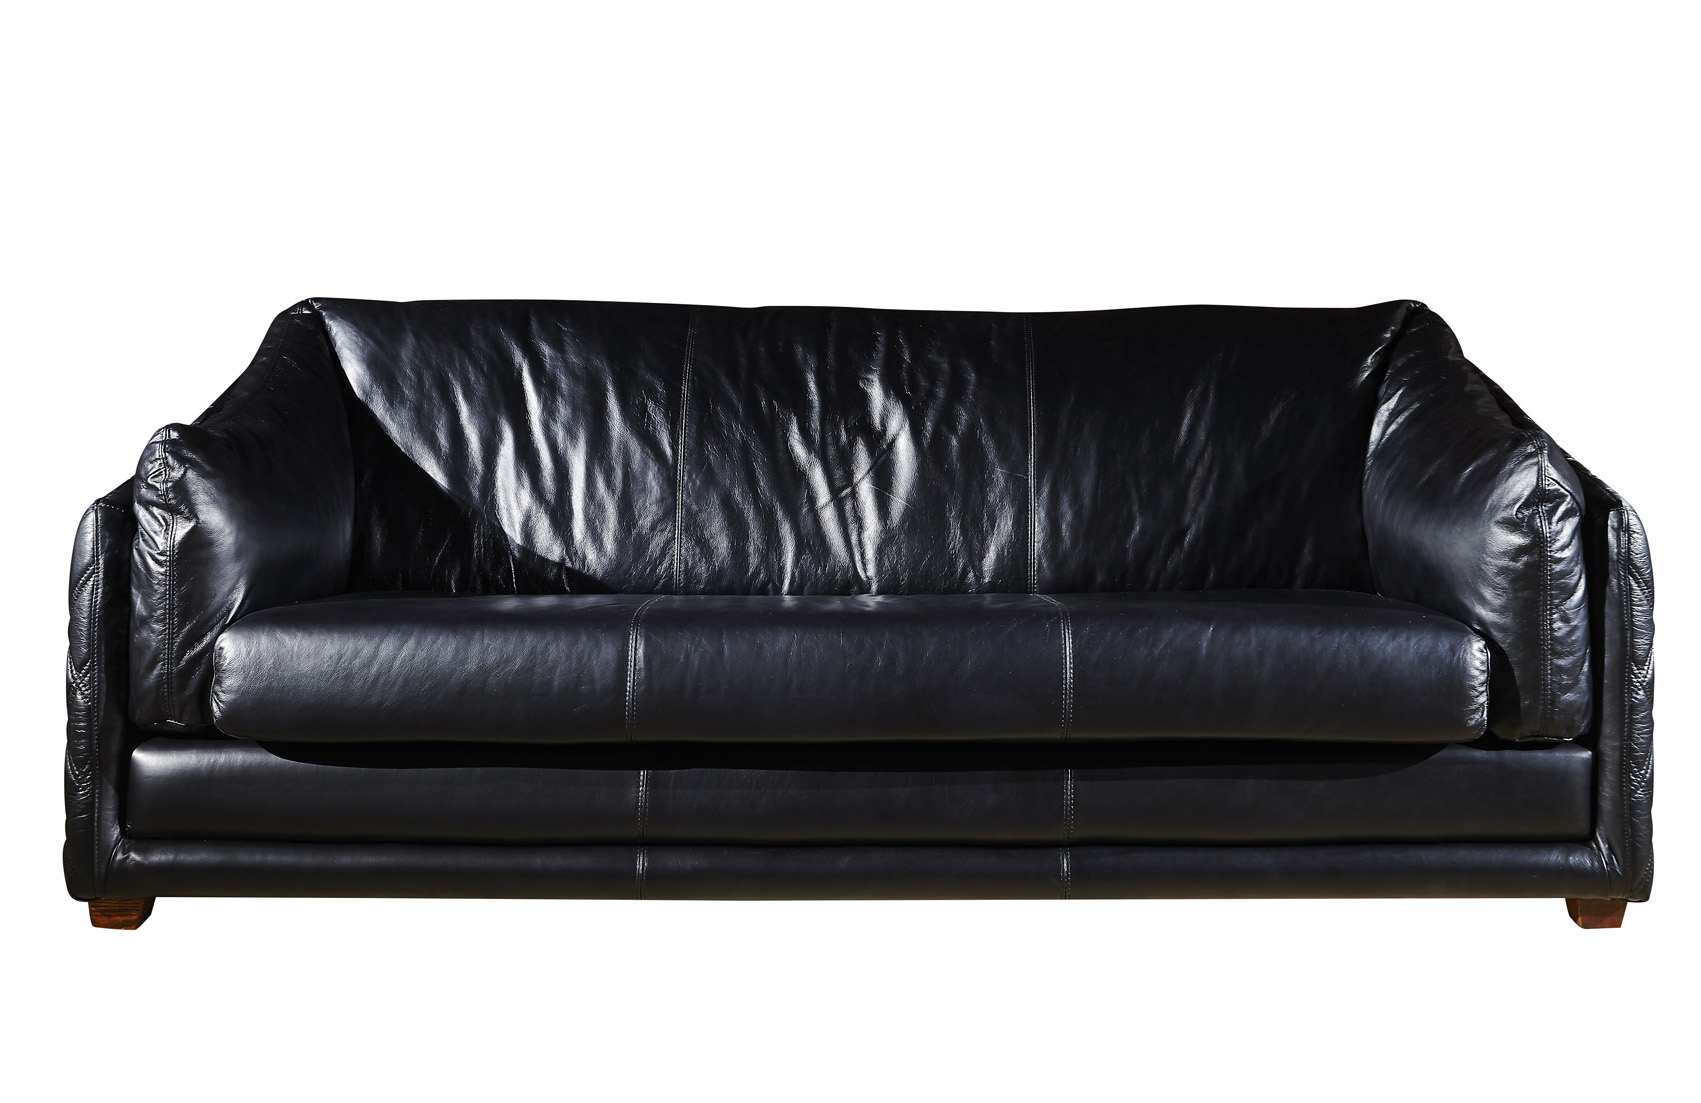 Compact Comforatble Pure Top Grain Black Leather Sofa With Diamond Quilted Sides